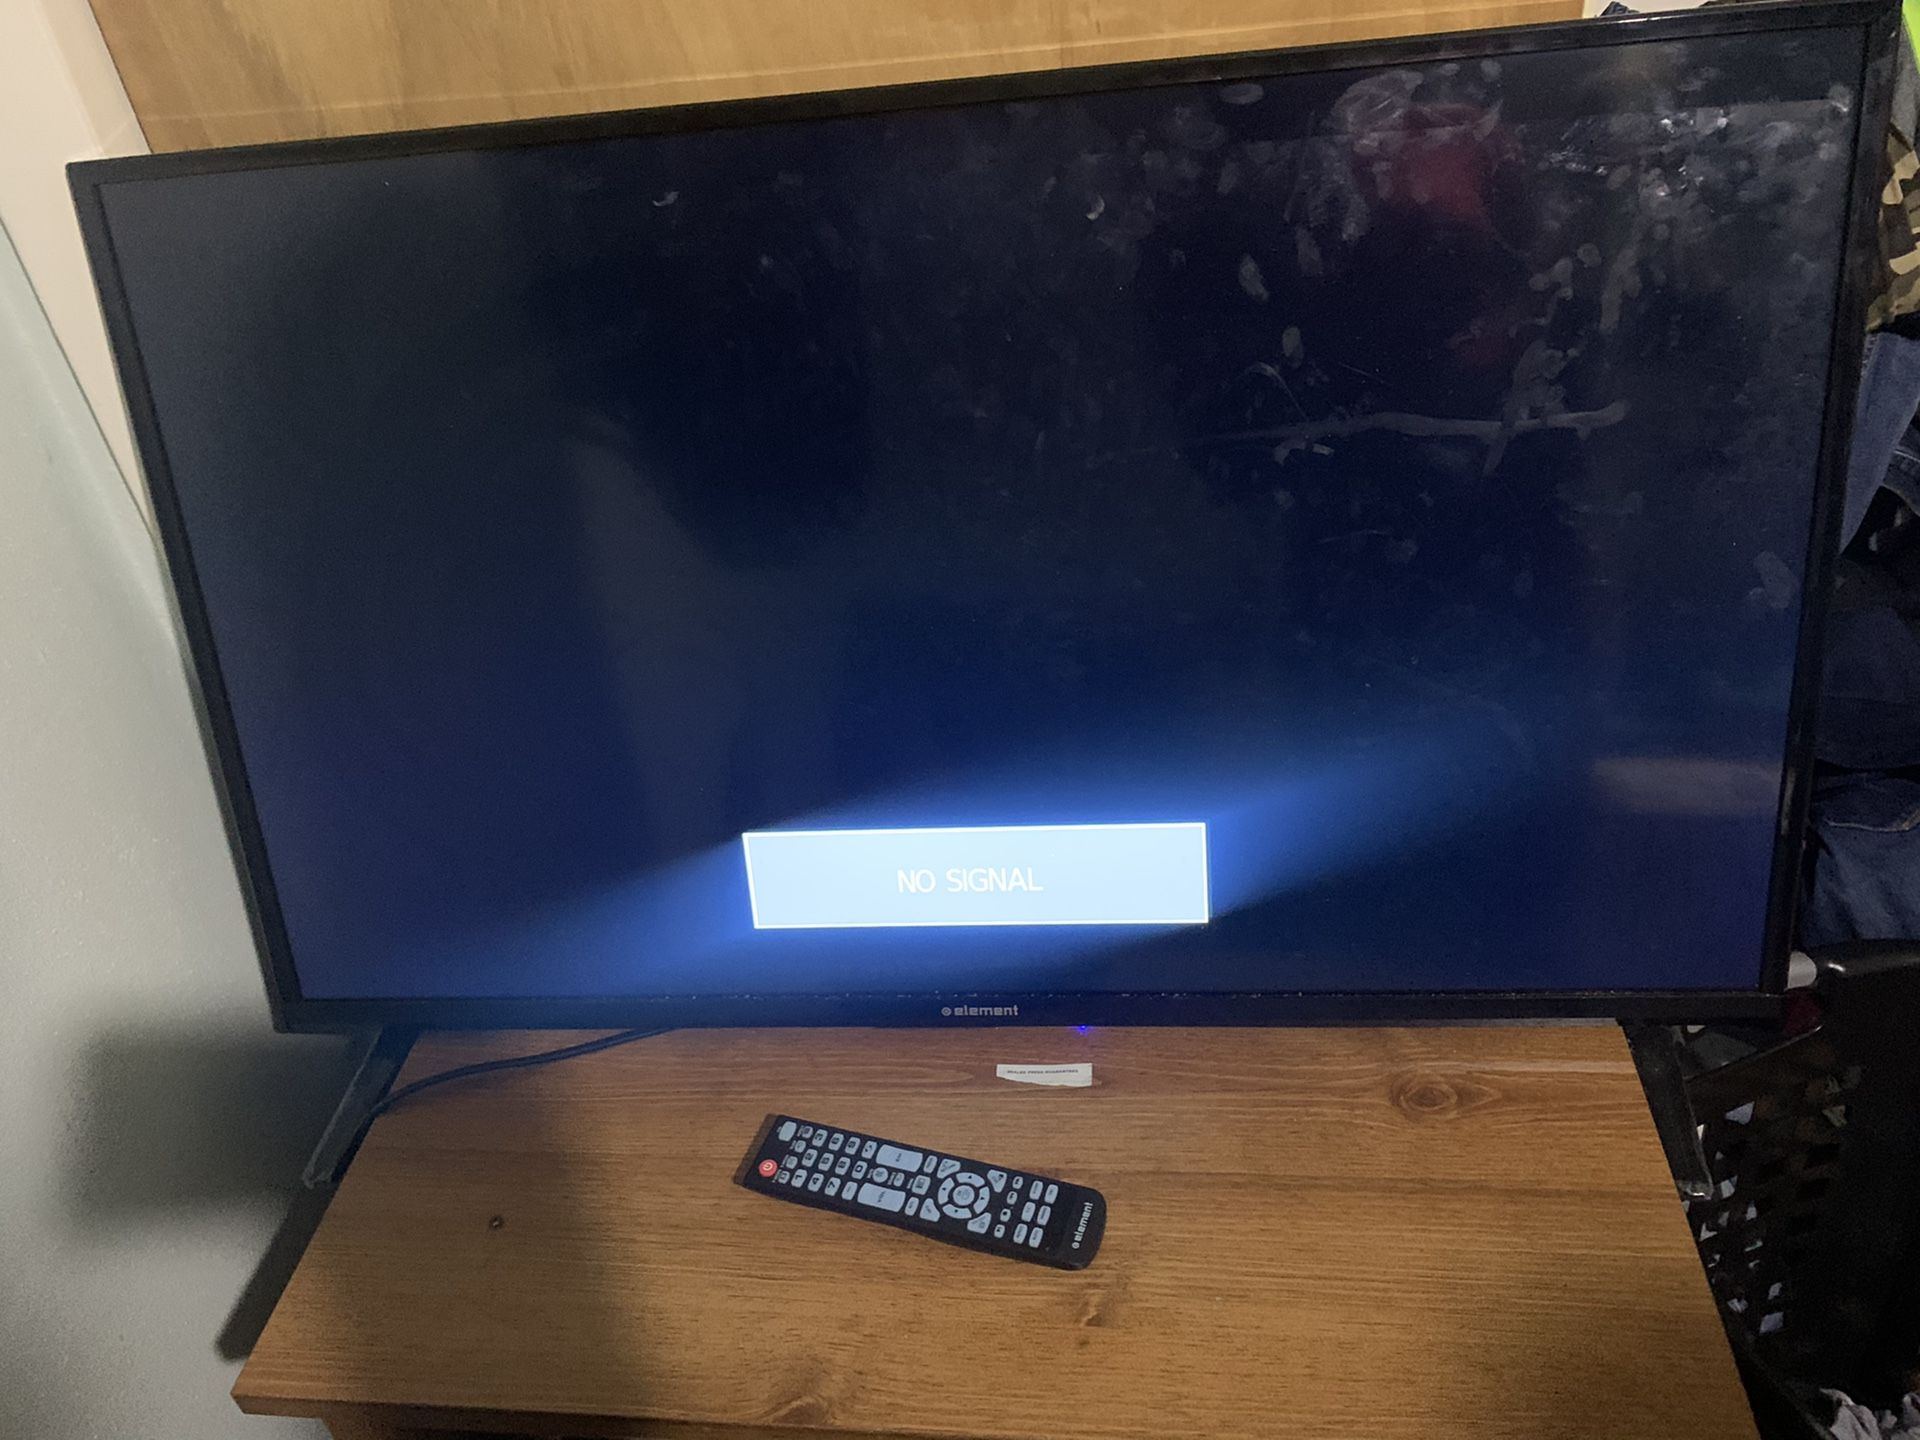 40 in element flatscreen barely used with box